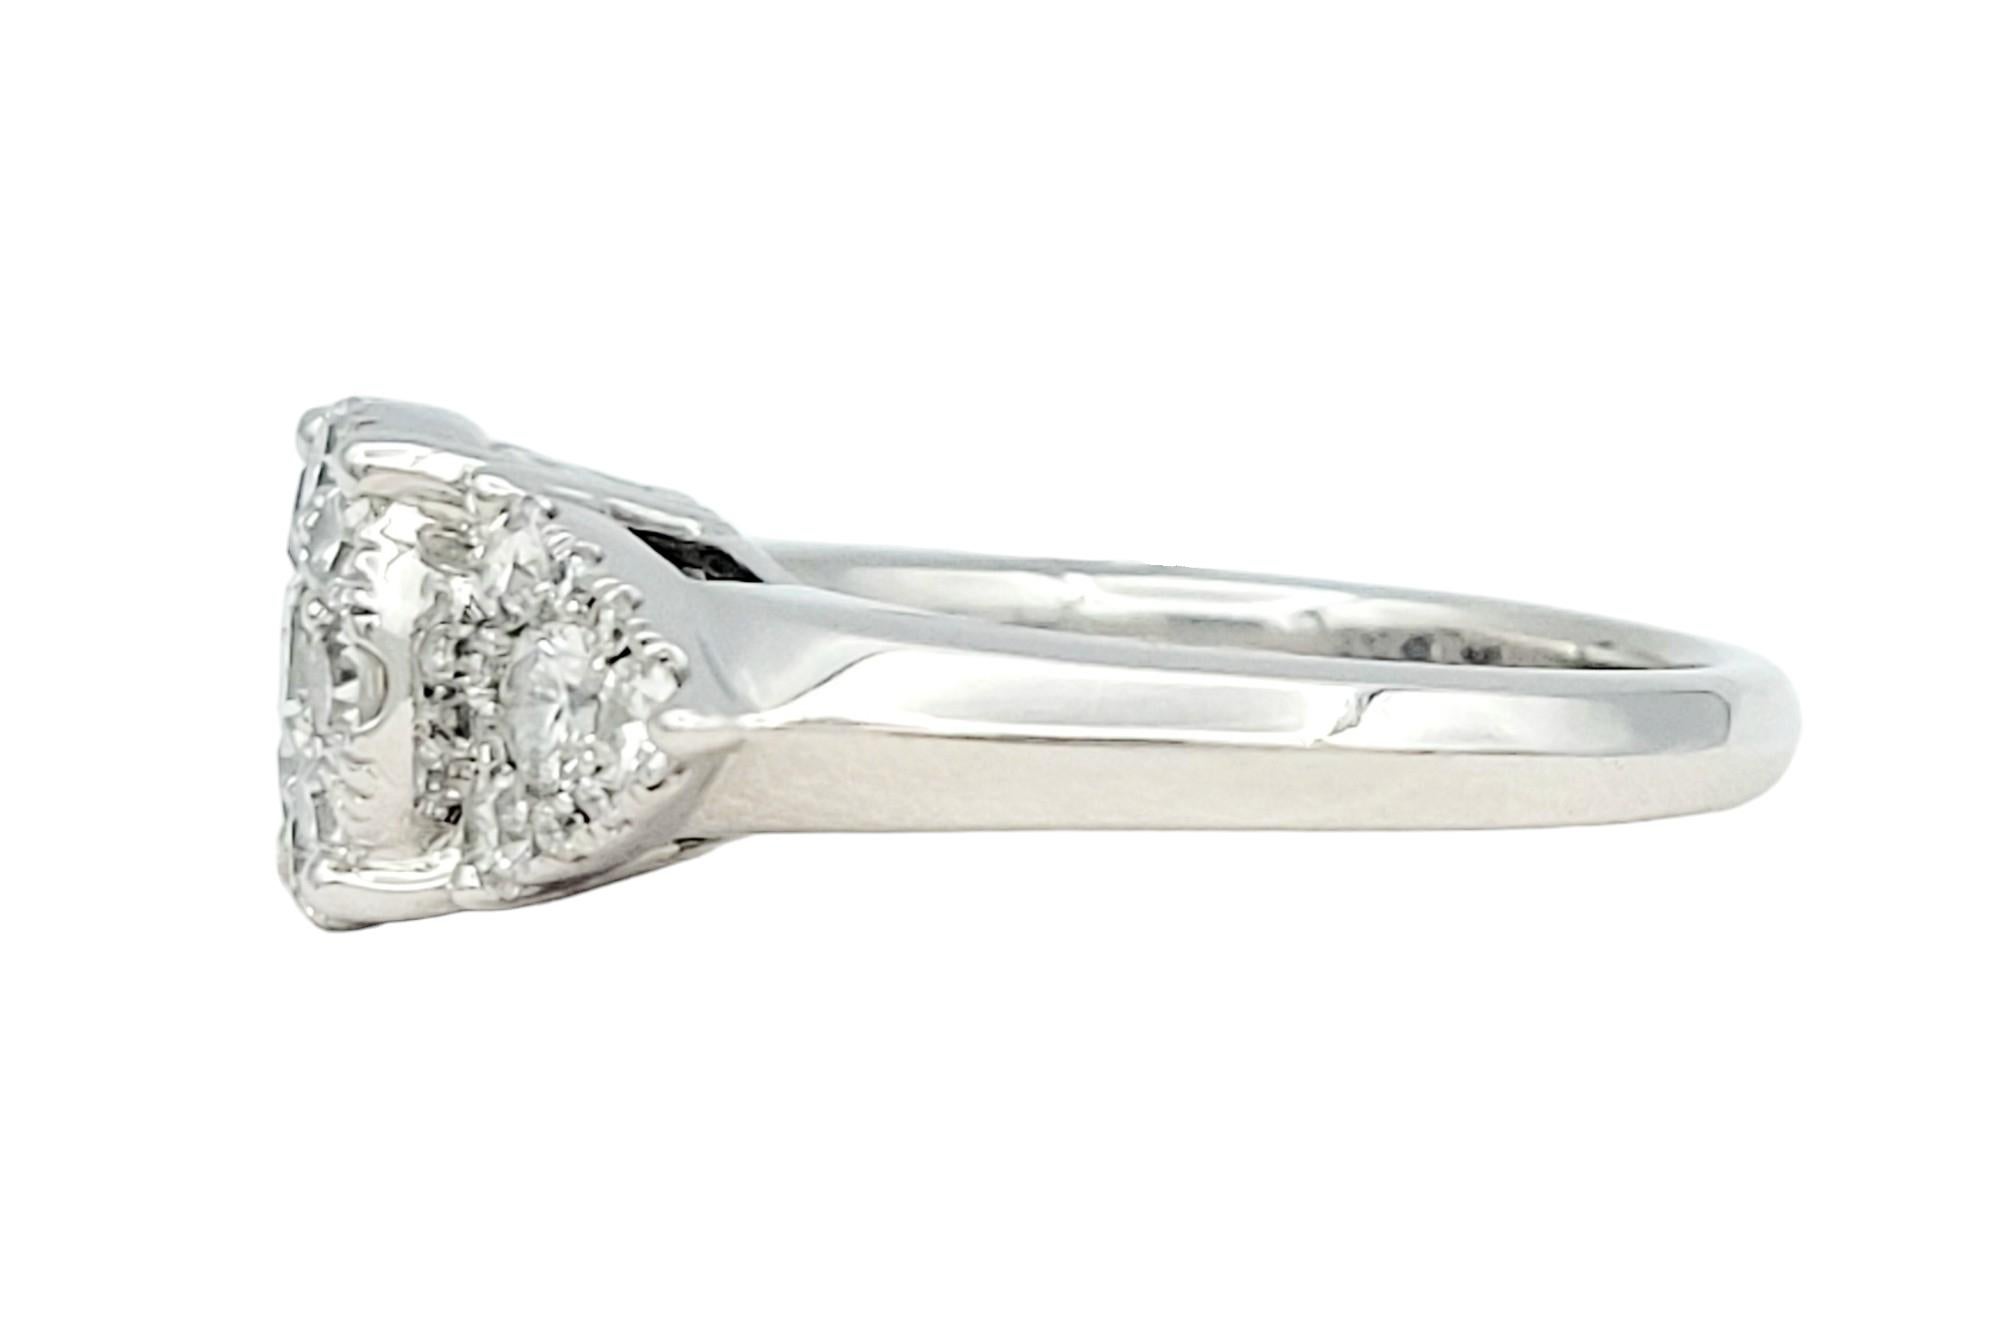 1.25 Carat Total Clustered Diamond Ring Set in Polished 14 Karat White Gold In Good Condition For Sale In Scottsdale, AZ